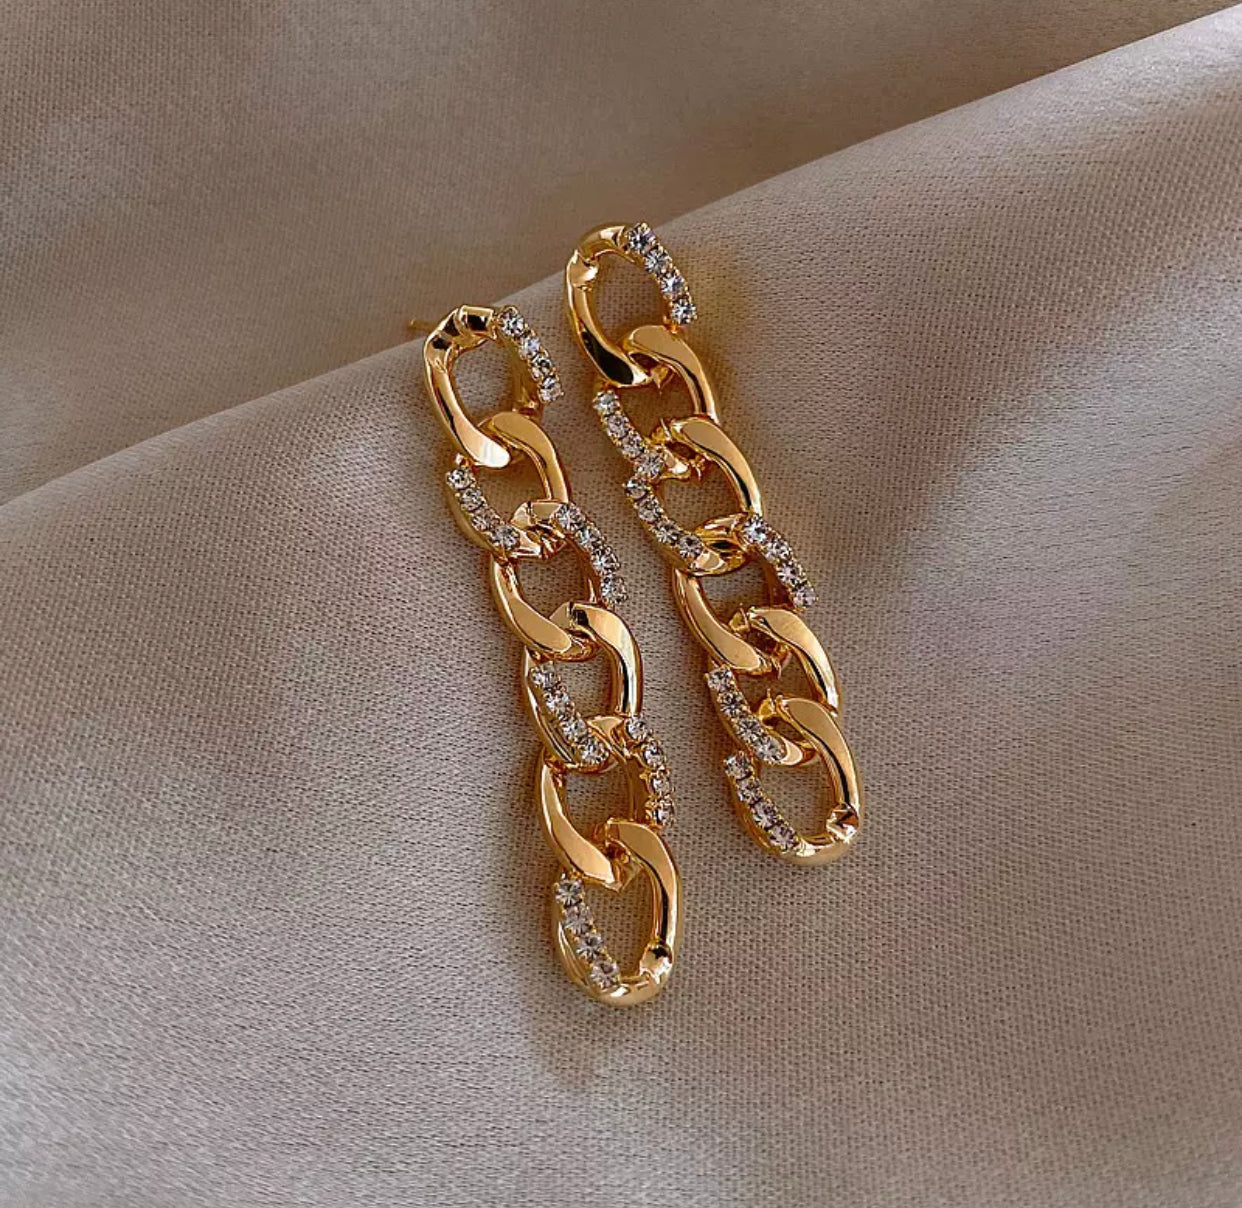 Gold Cuban Link Chain with CZ Embellishment Earrings